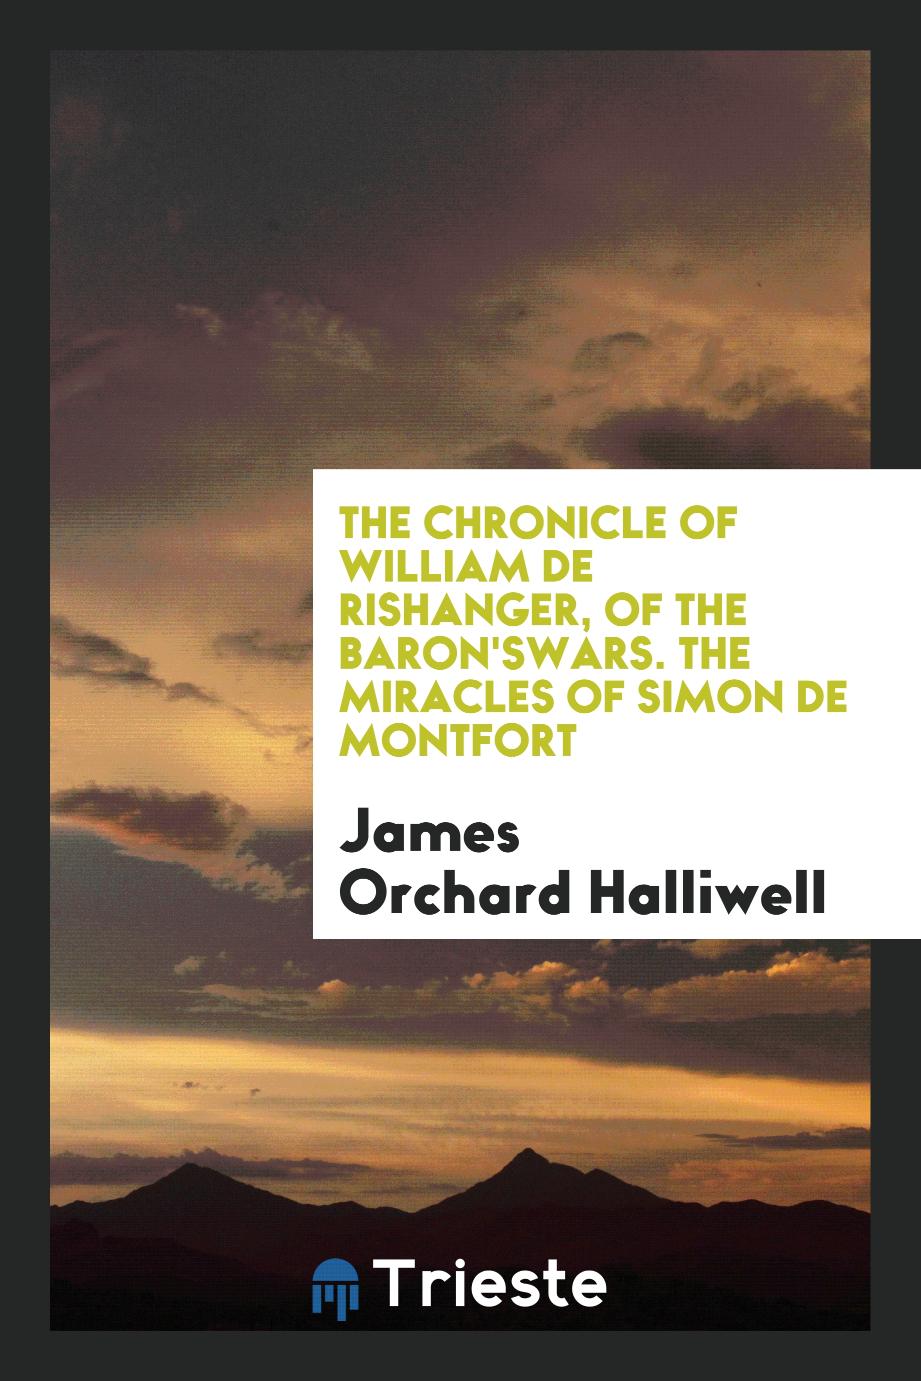 The Chronicle of William de Rishanger, of The Baron'sWars. The Miracles of Simon de Montfort